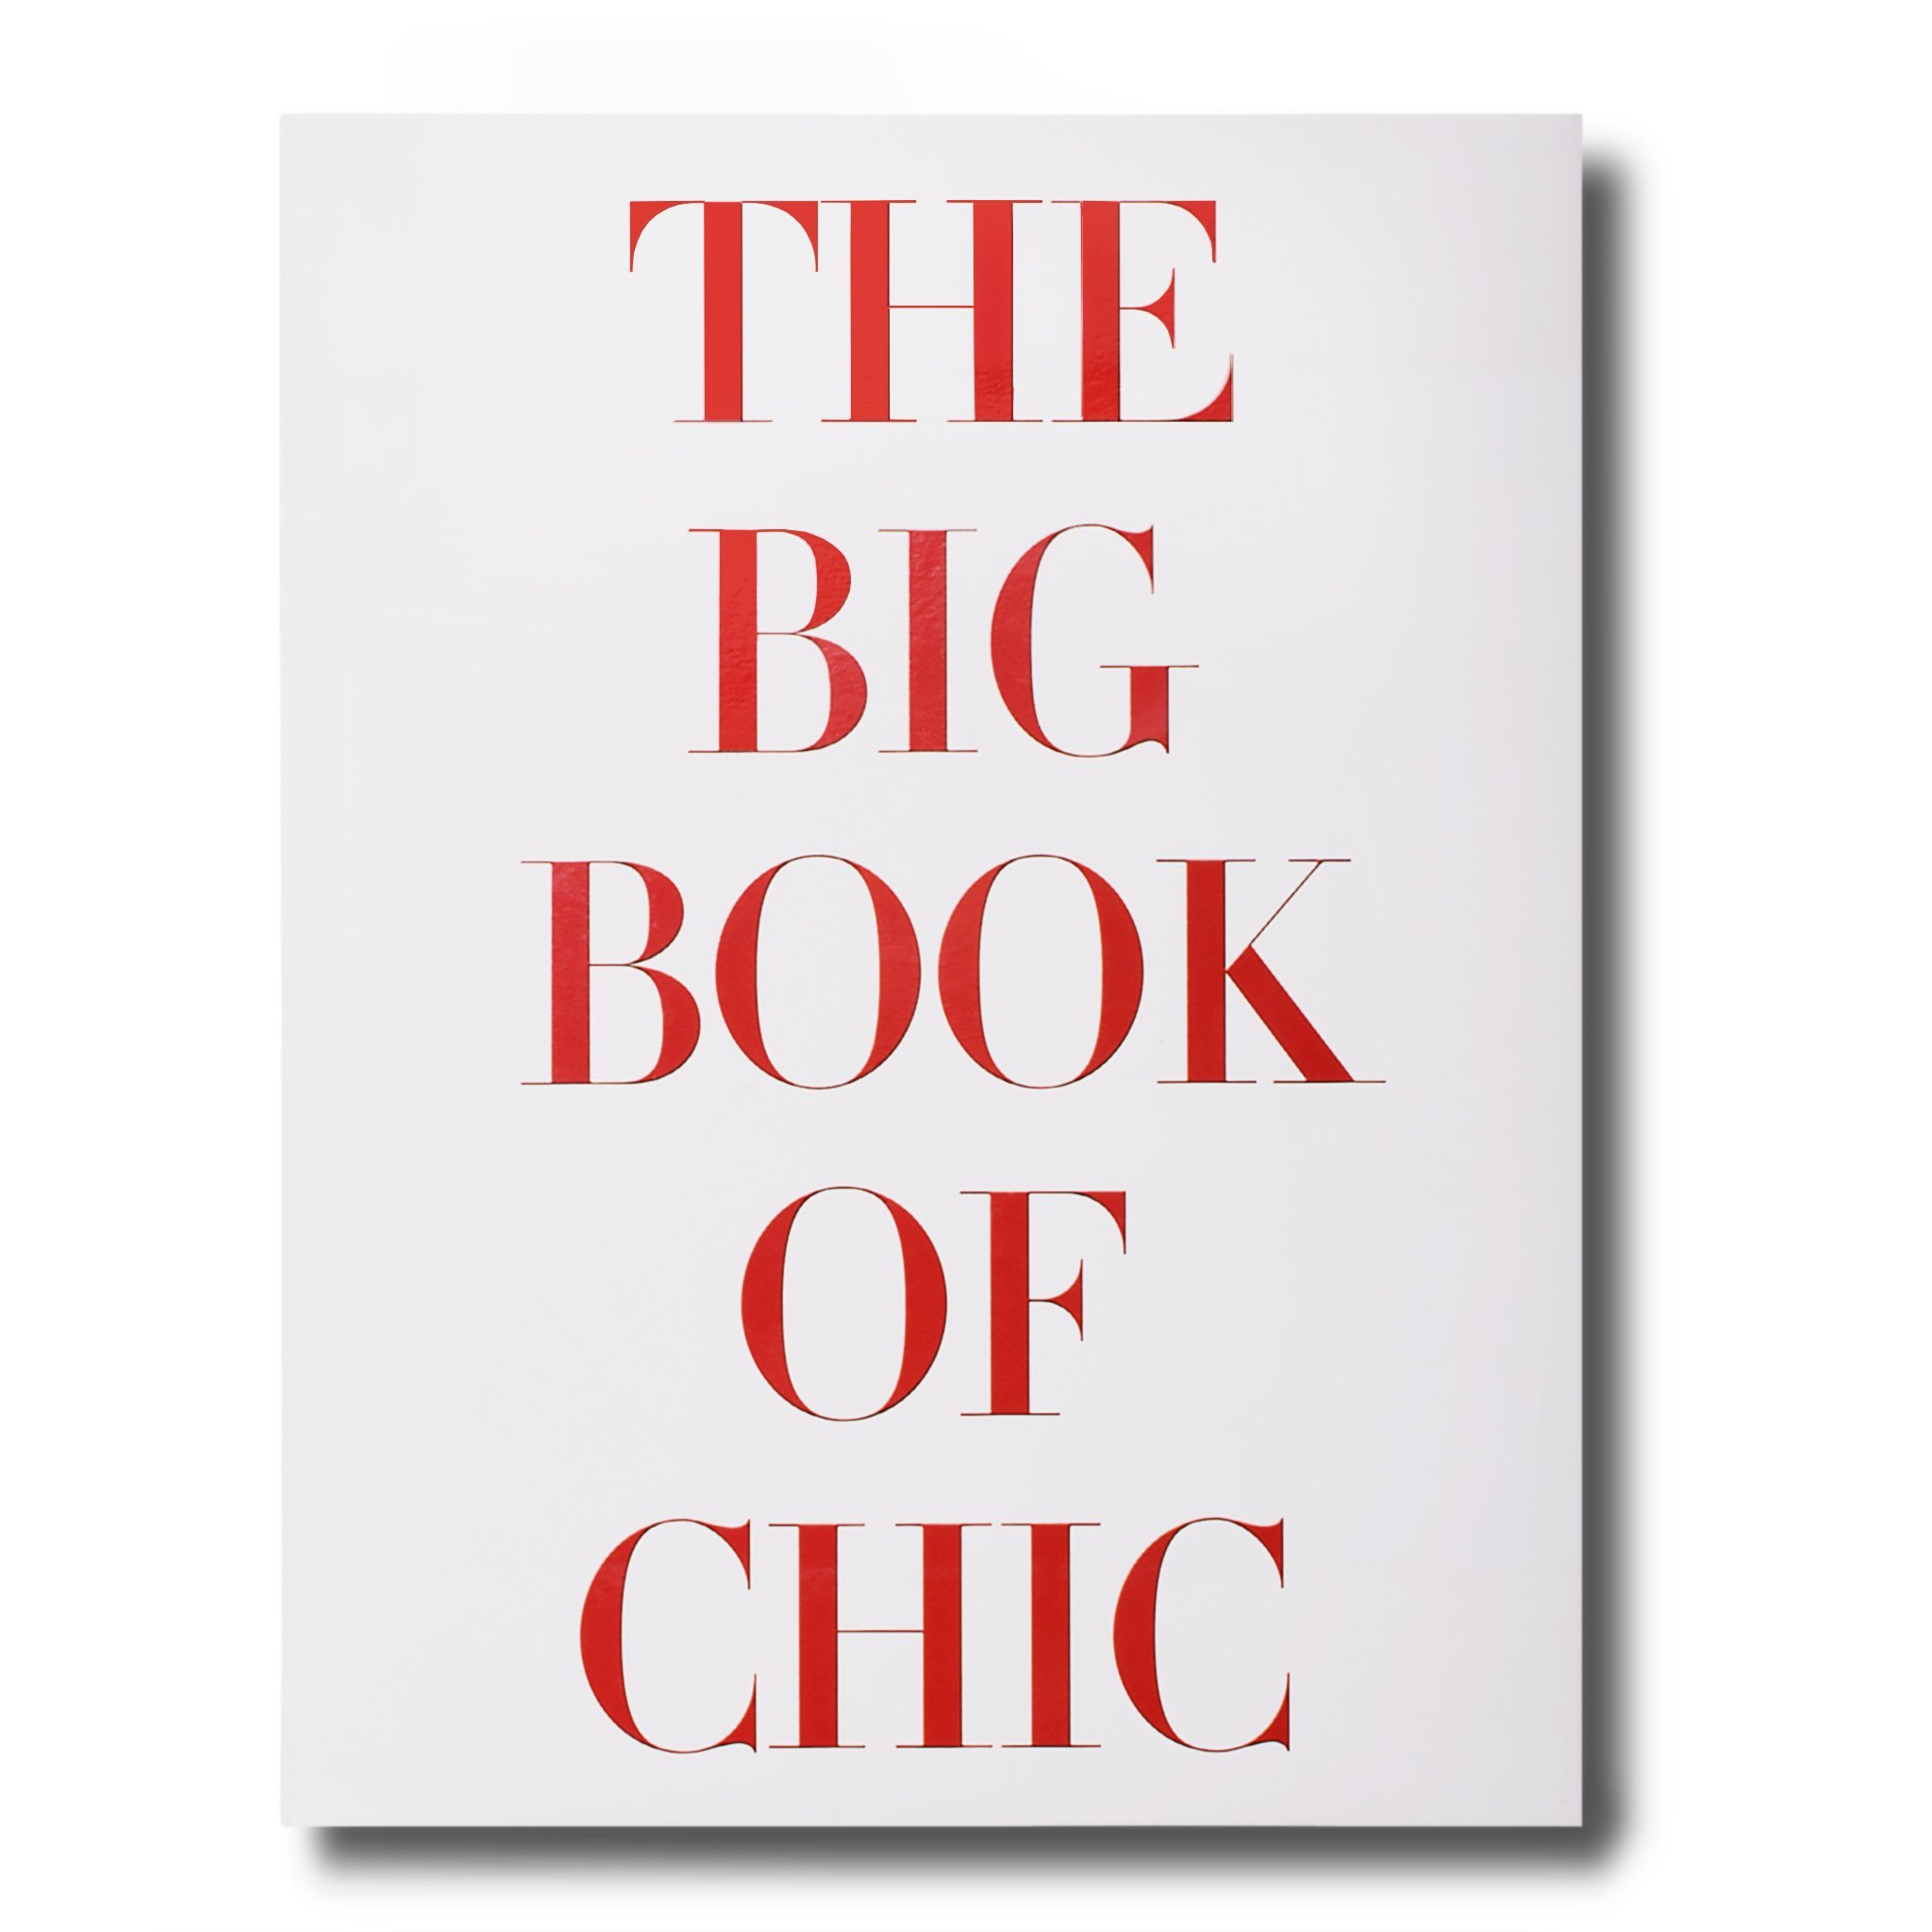 AS BIG-BOOK-OF-CHIC-A_2048x.jpg